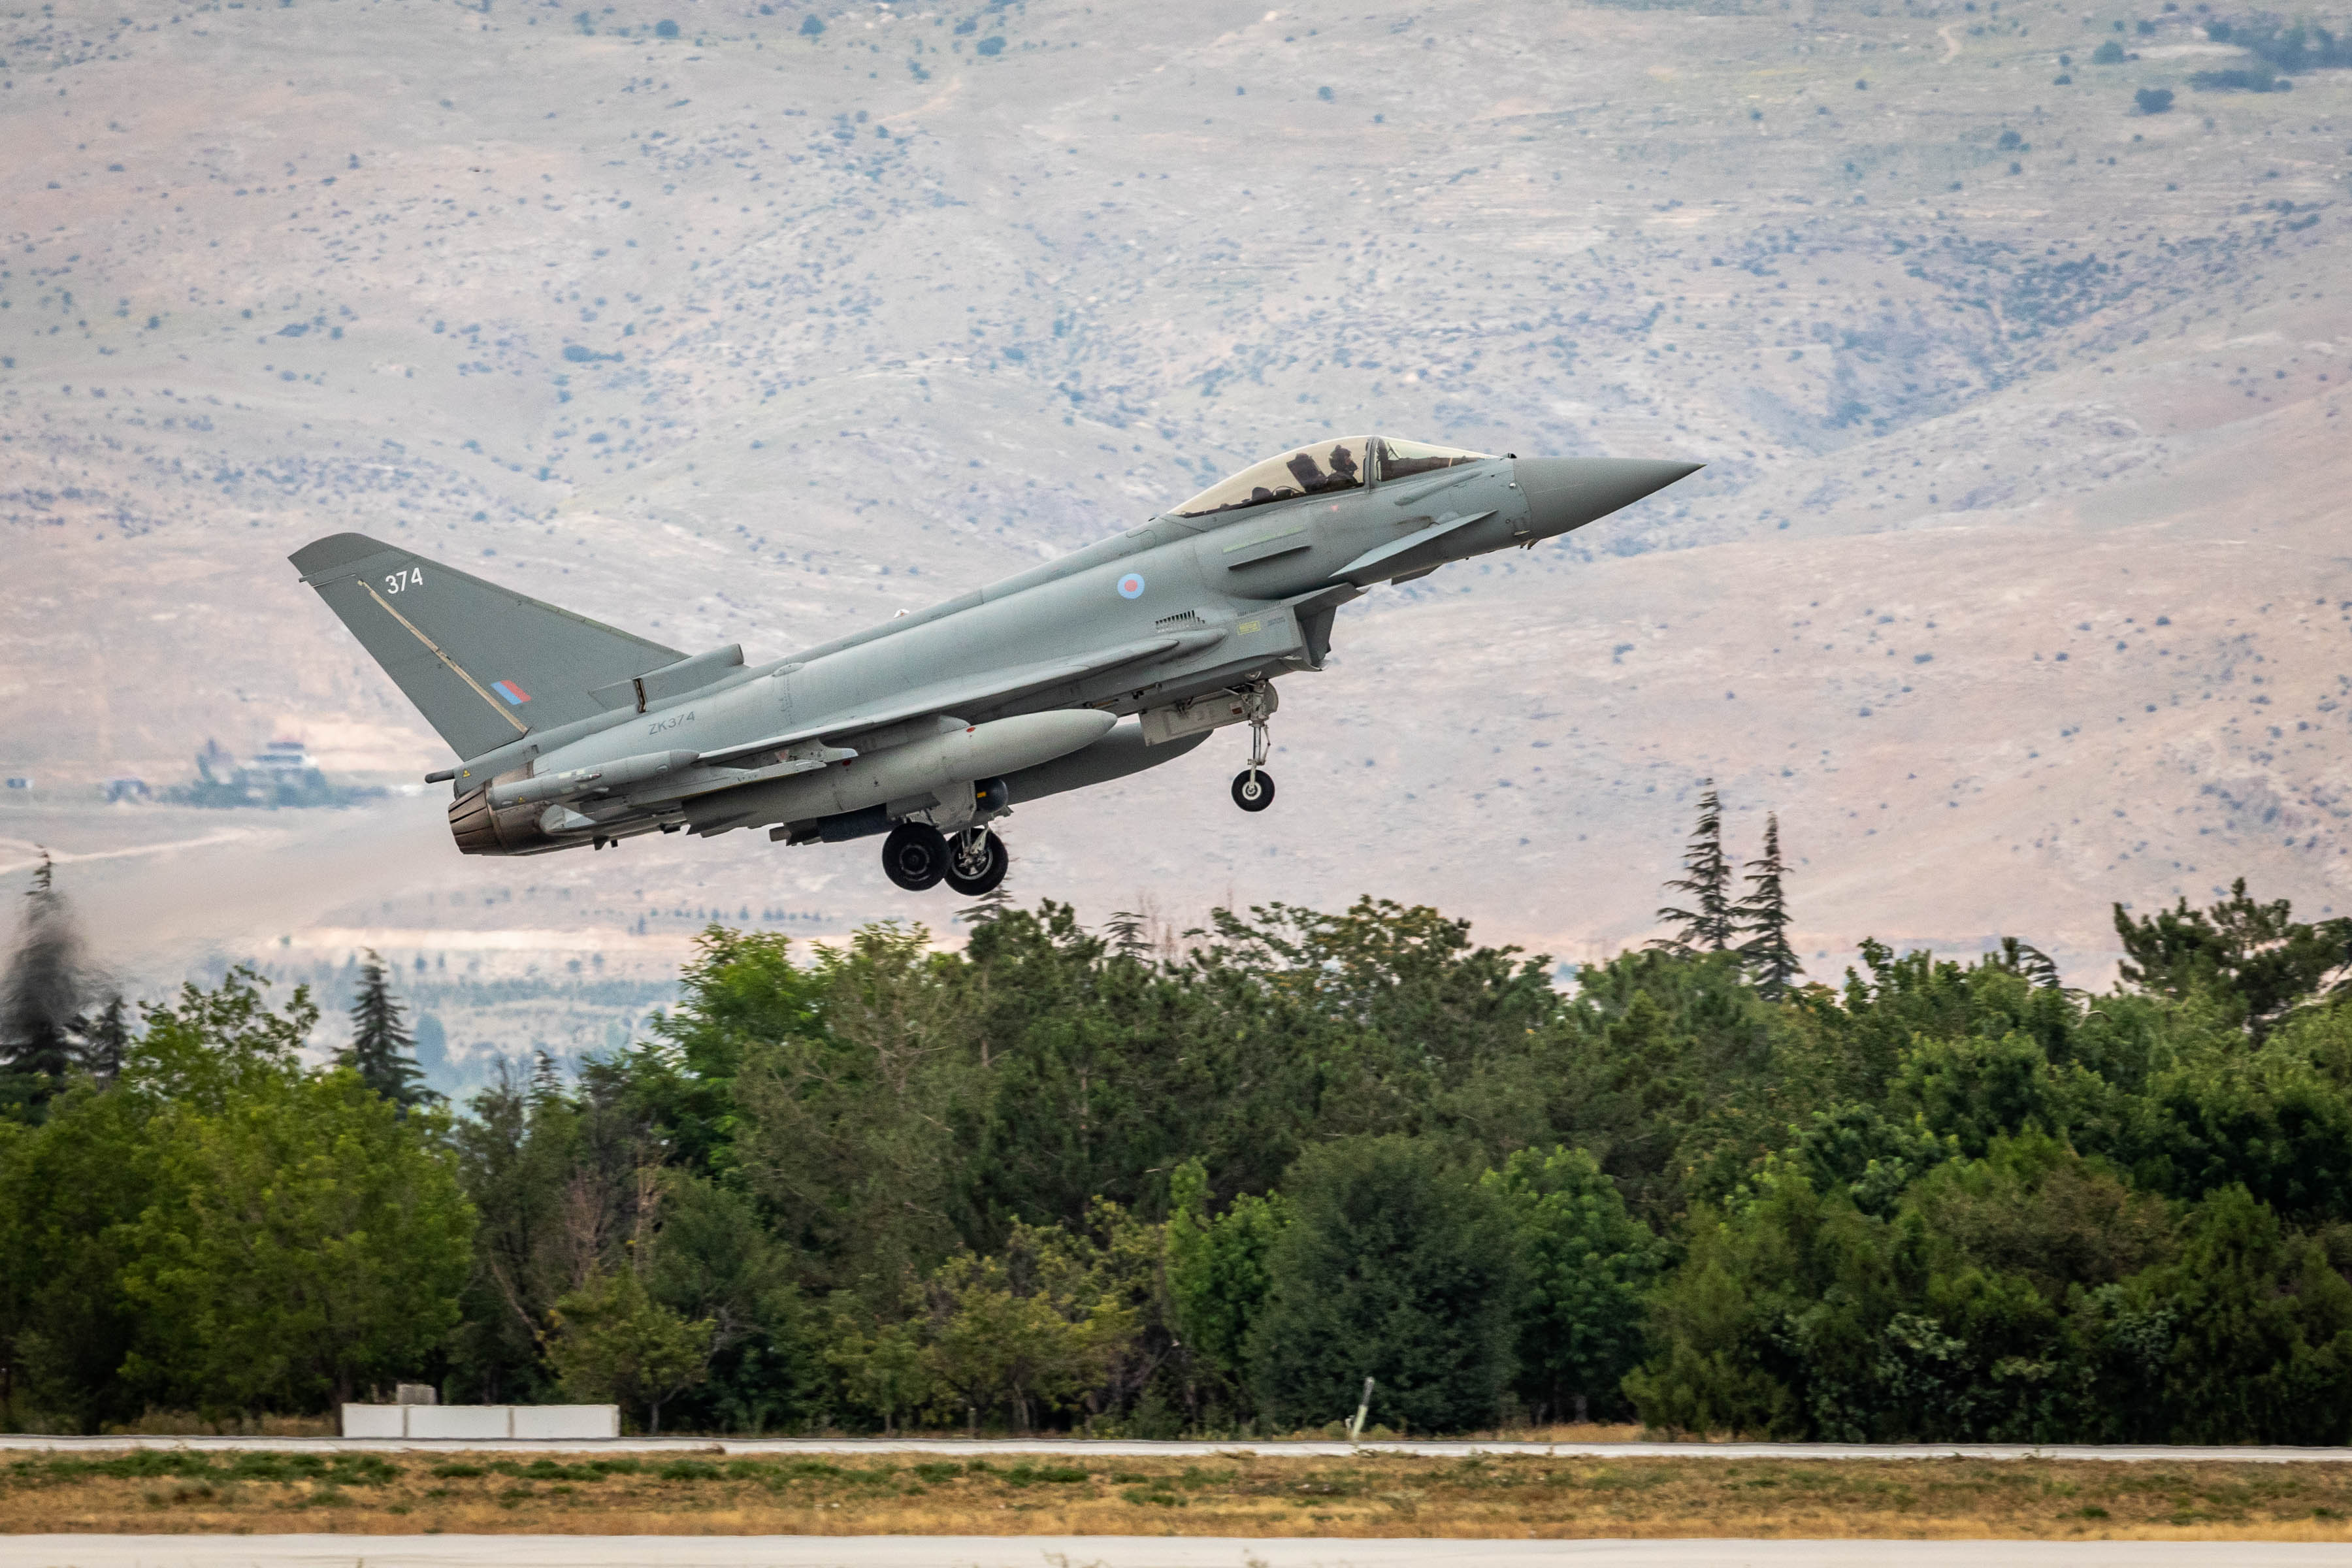 Image shows a Typhoon aircraft taking off.